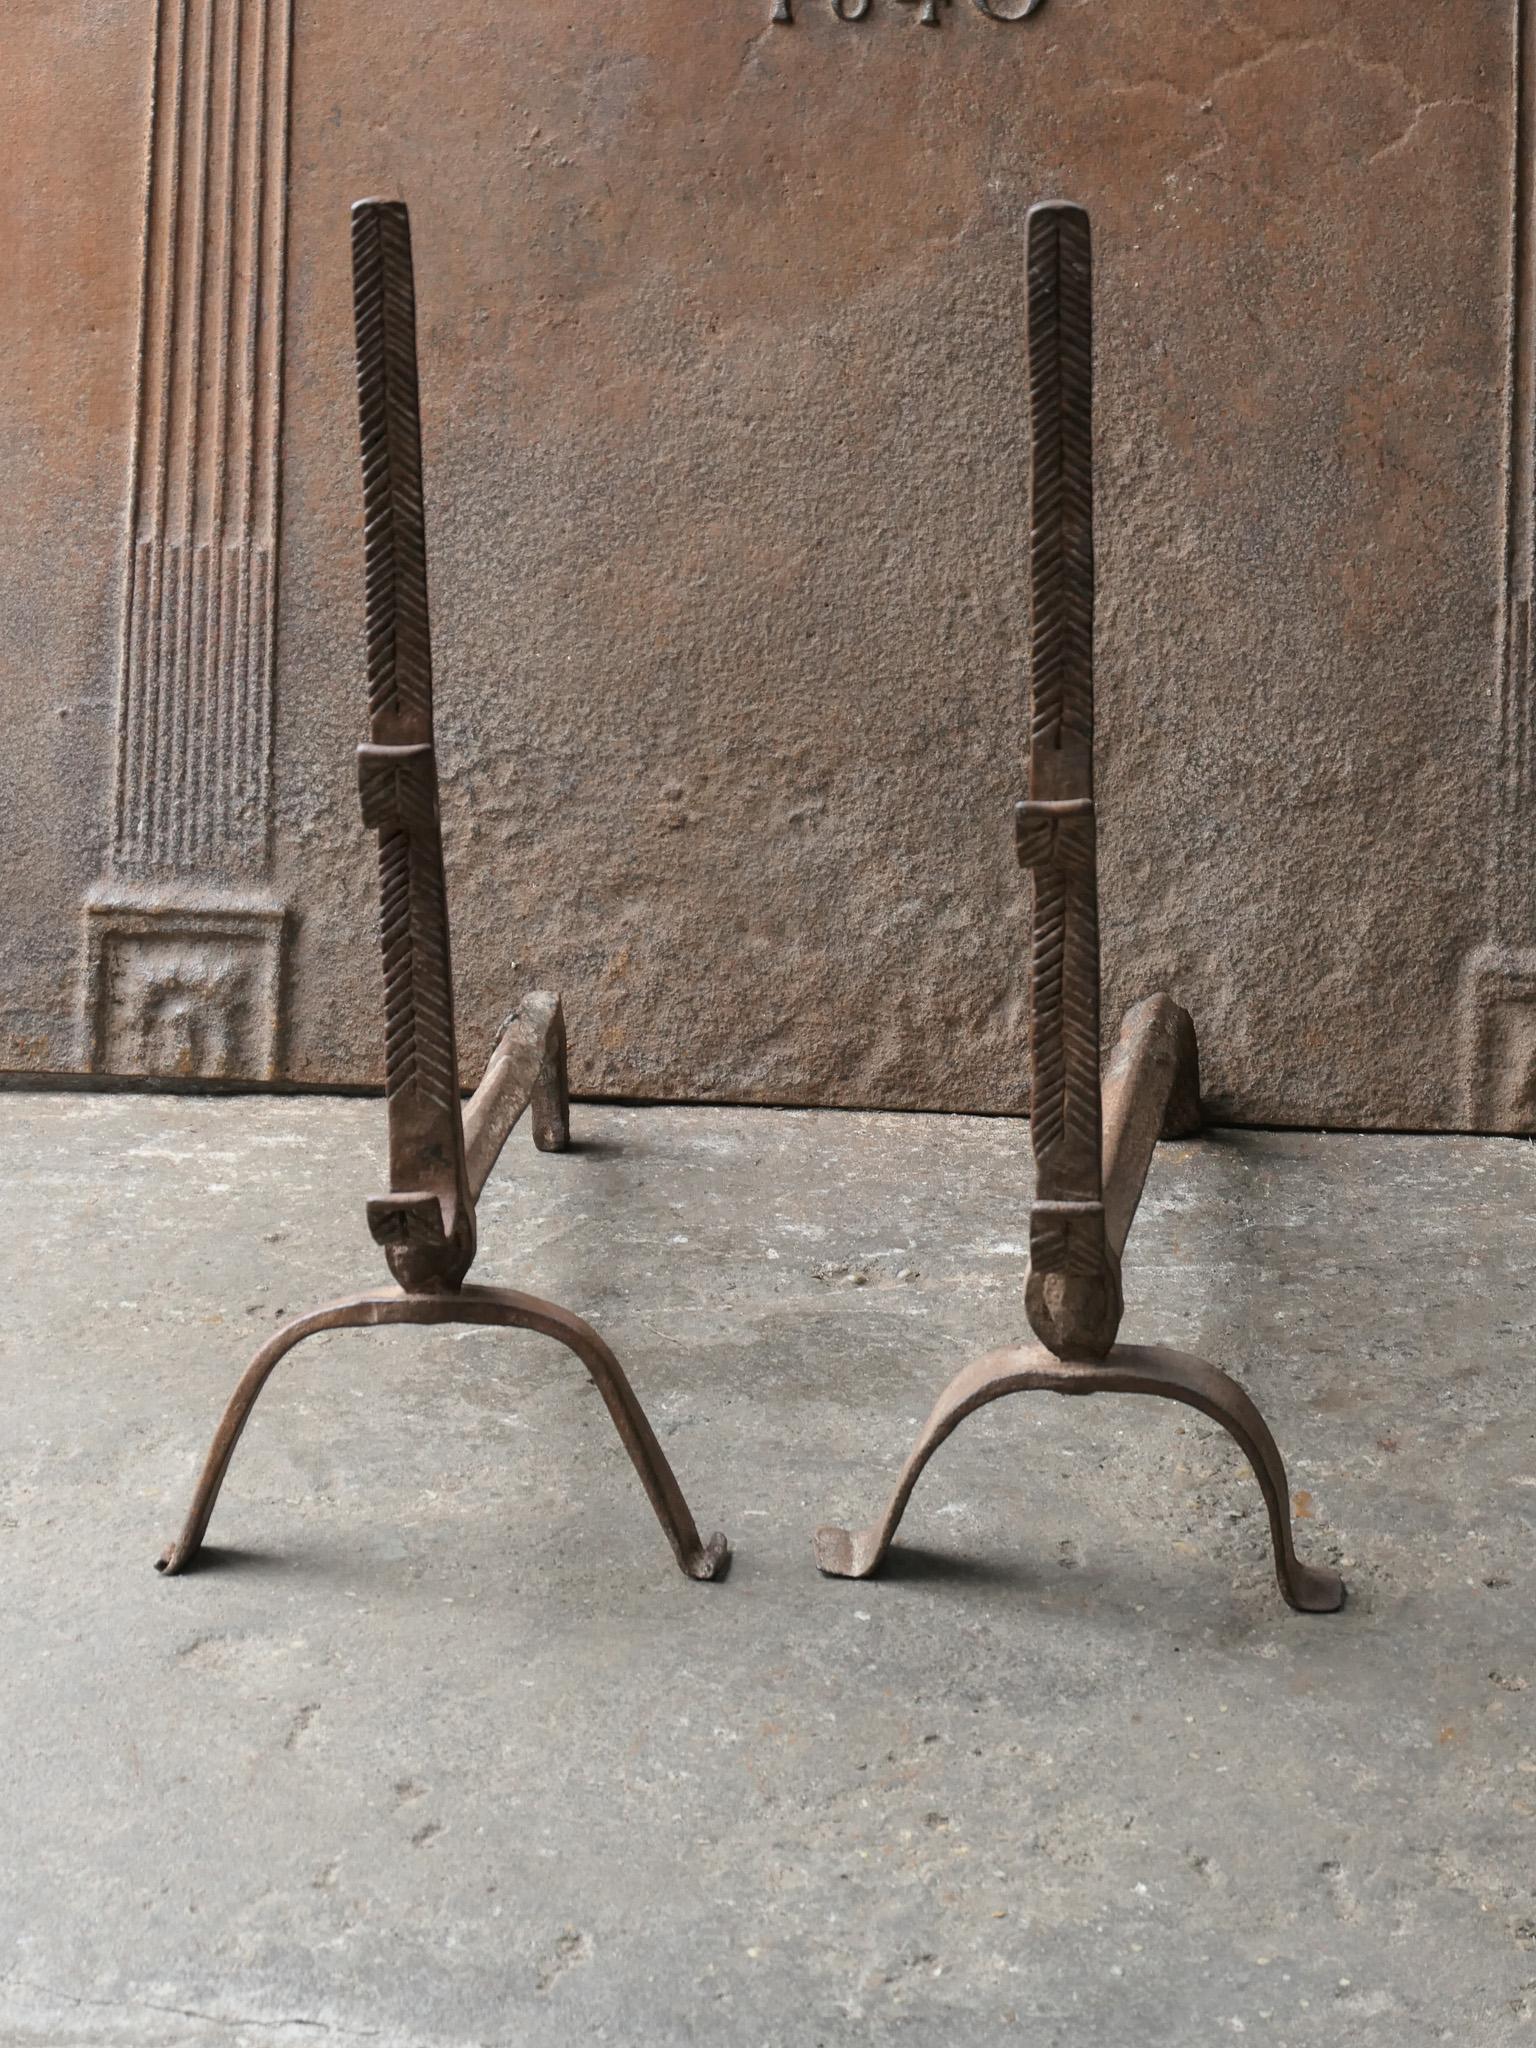 17th century French Louis XIII fire dogs with spit hooks. Made of wrought iron. These French andirons are called 'landiers' in France. This dates from the times the andirons were the main cooking equipment in the house. They had spit hooks to grill